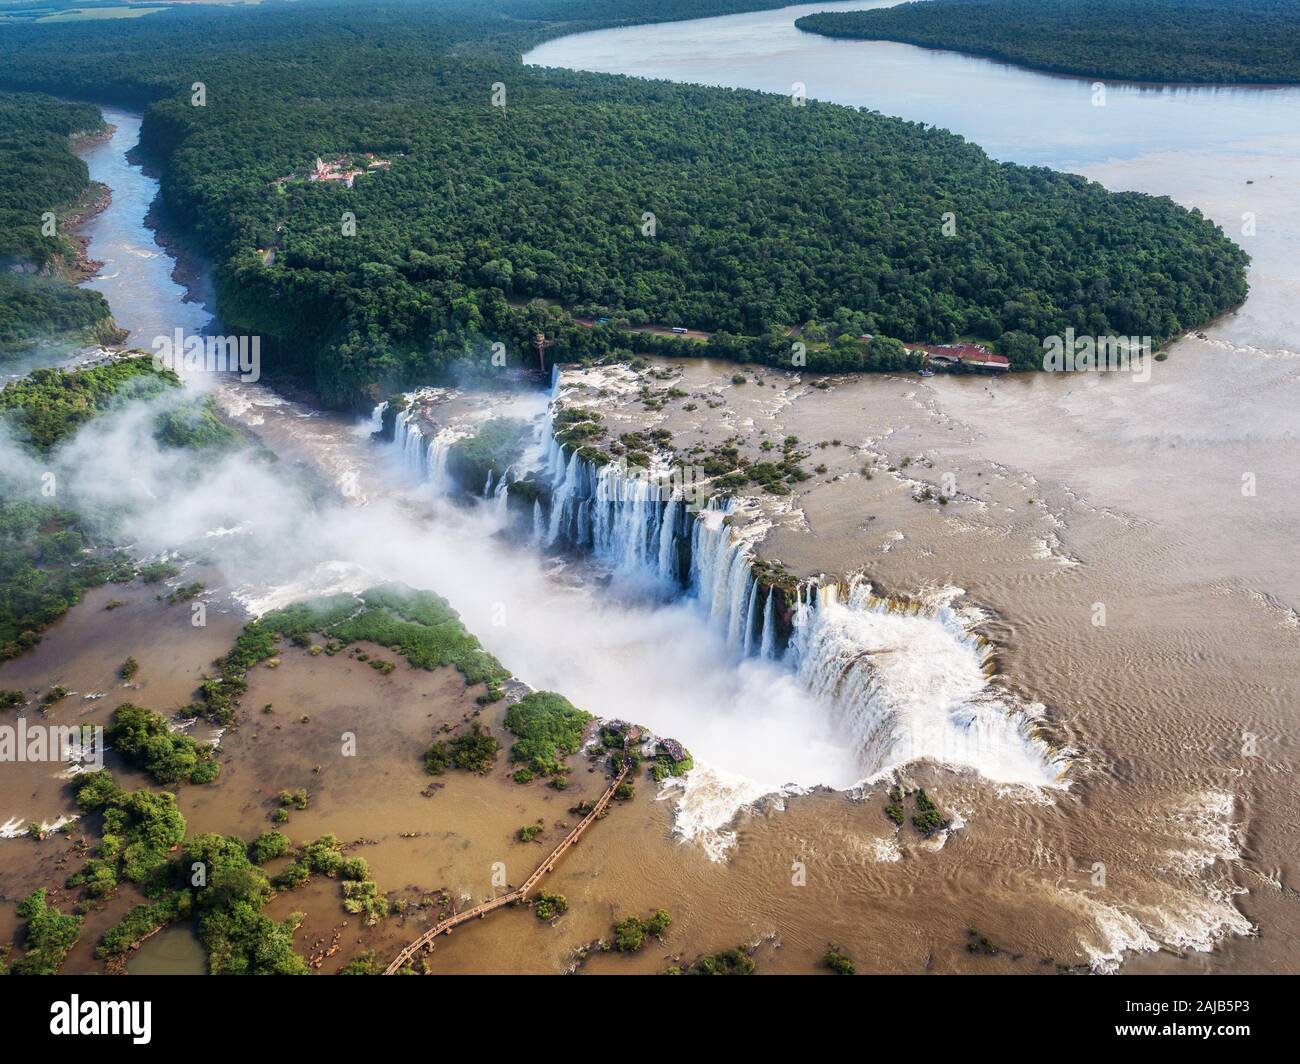 Iguazu Falls on the border of Argentina and Brazil, aerial view. Stock Photo